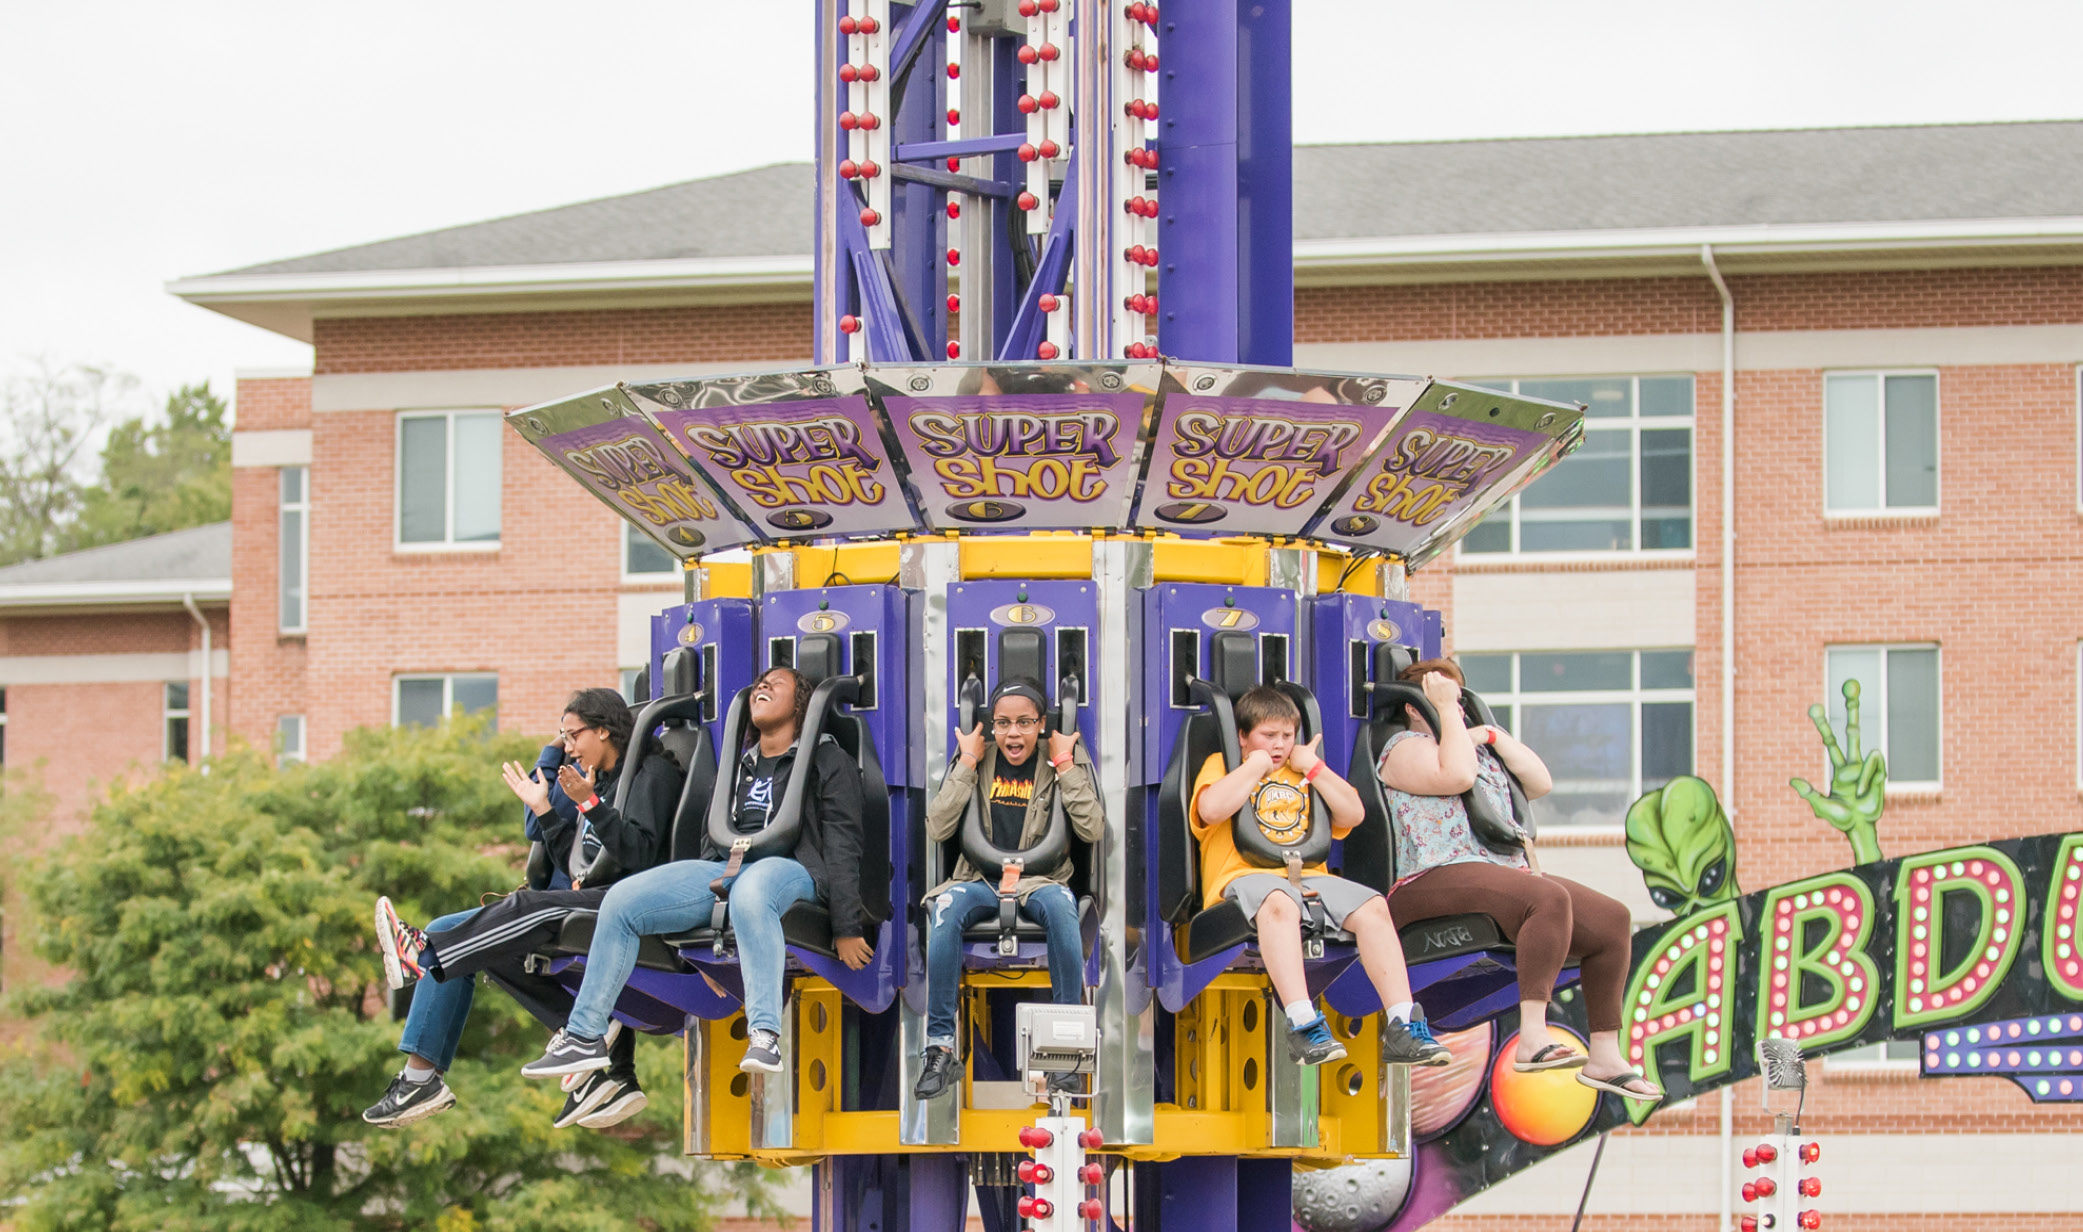 The Homecoming Carnival will run all day, Saturday, October 13.